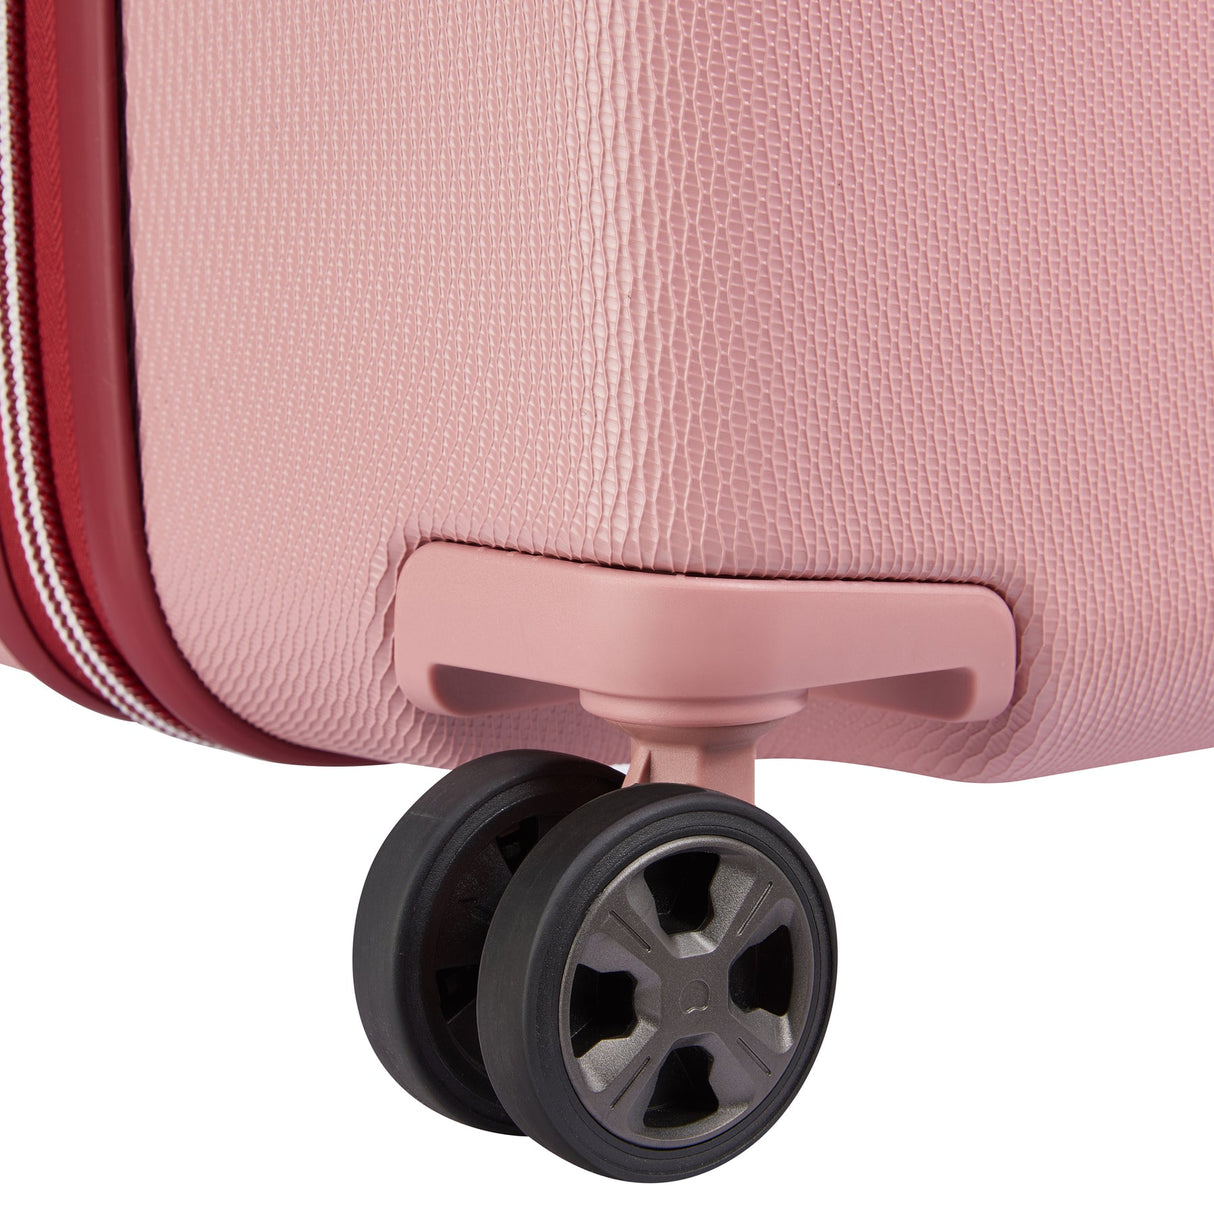 Delsey Chatelet Air 2.0 Carry-On Spinner , , delsey-chatelet-air-2.0-40167680509-13_1800x1800_4cf04b53-c66c-426b-94f5-9f9891e1b513